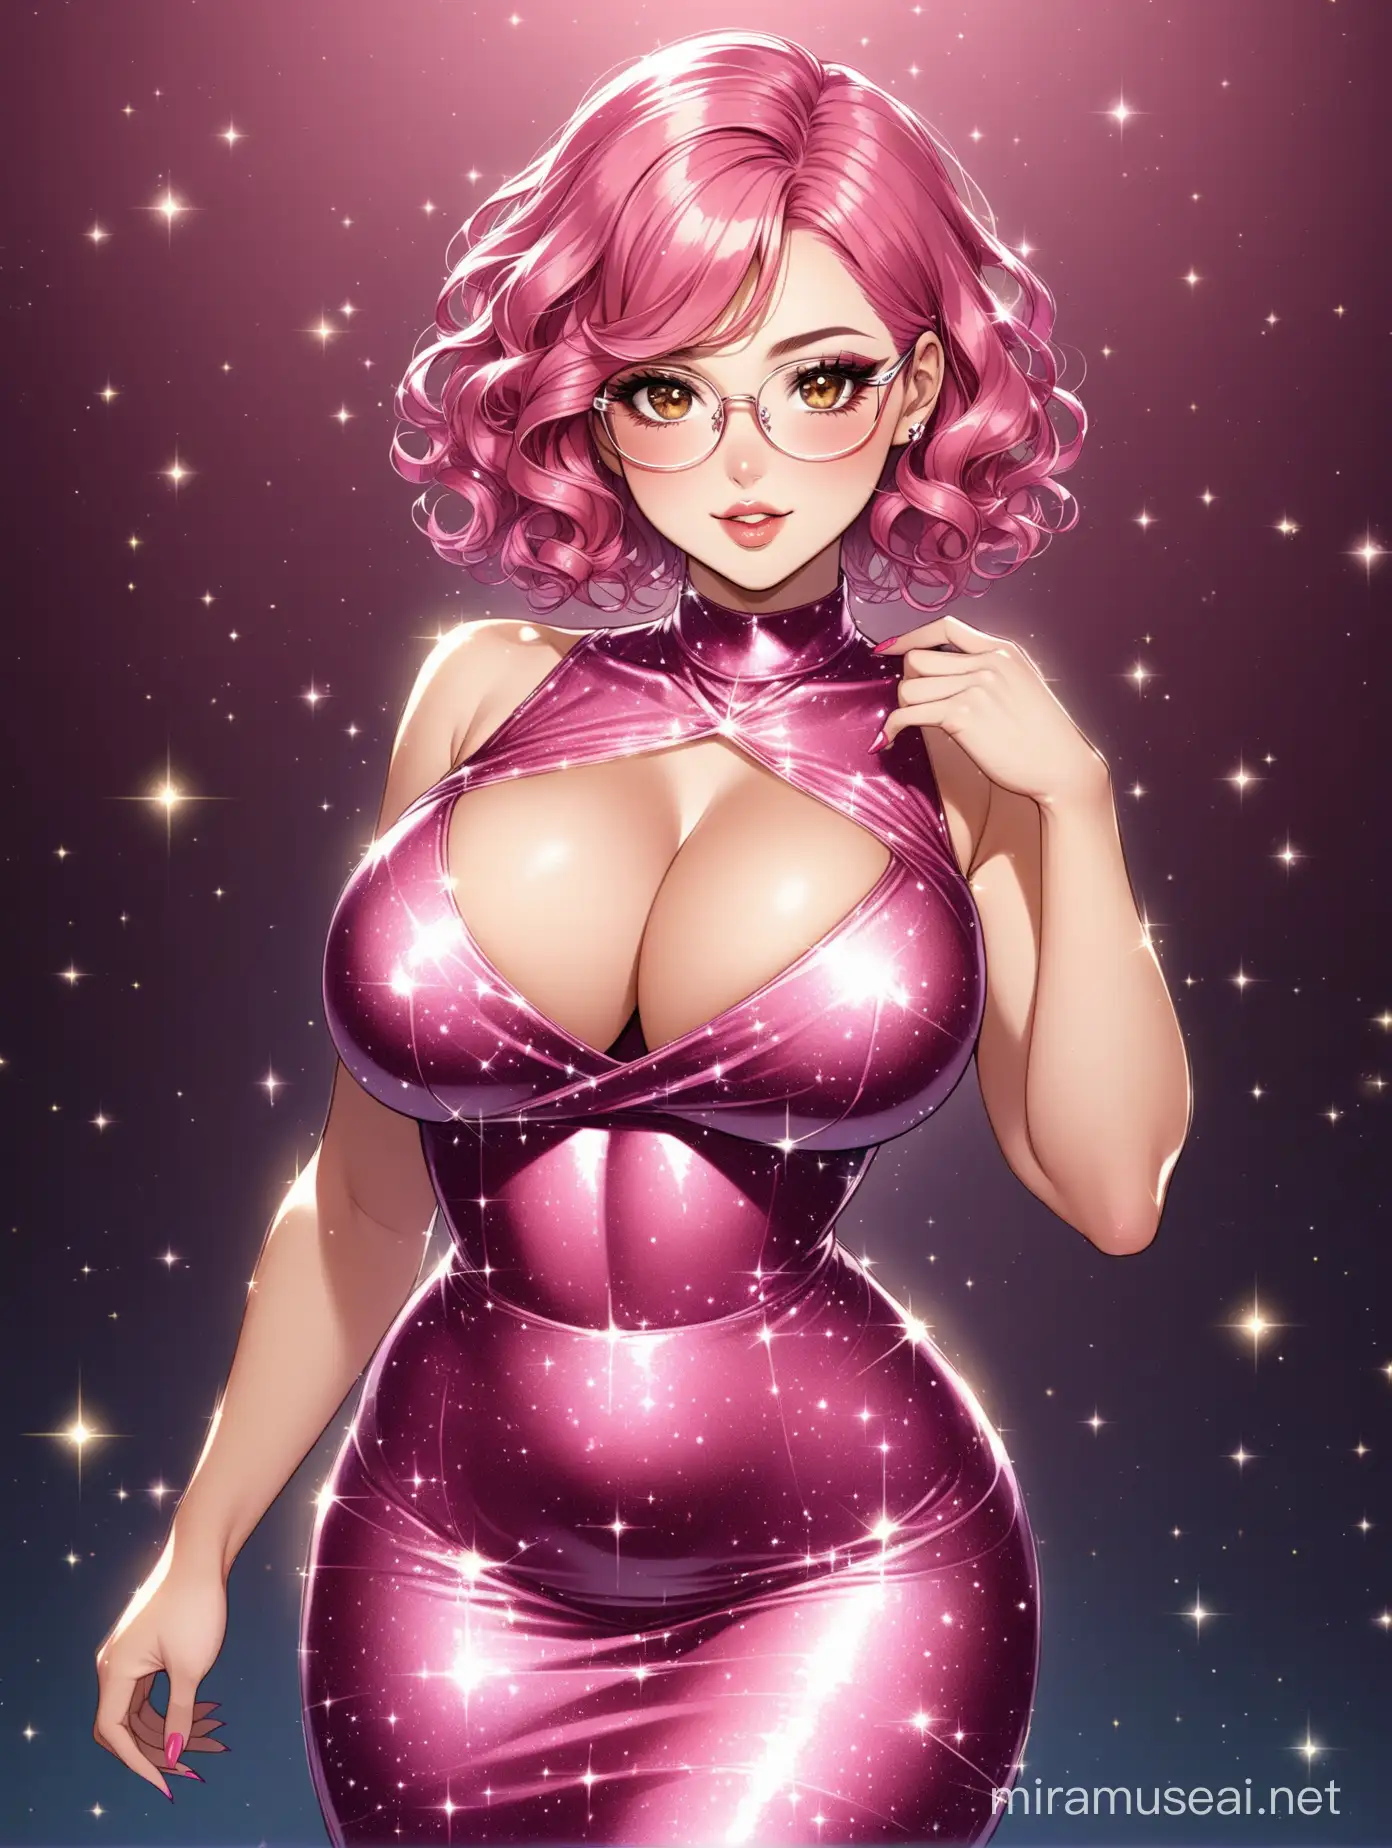 Short curly pink hair,glasses,brown eyes,gorgeous,wearing makeup,big breast,skin tight sparkly dress